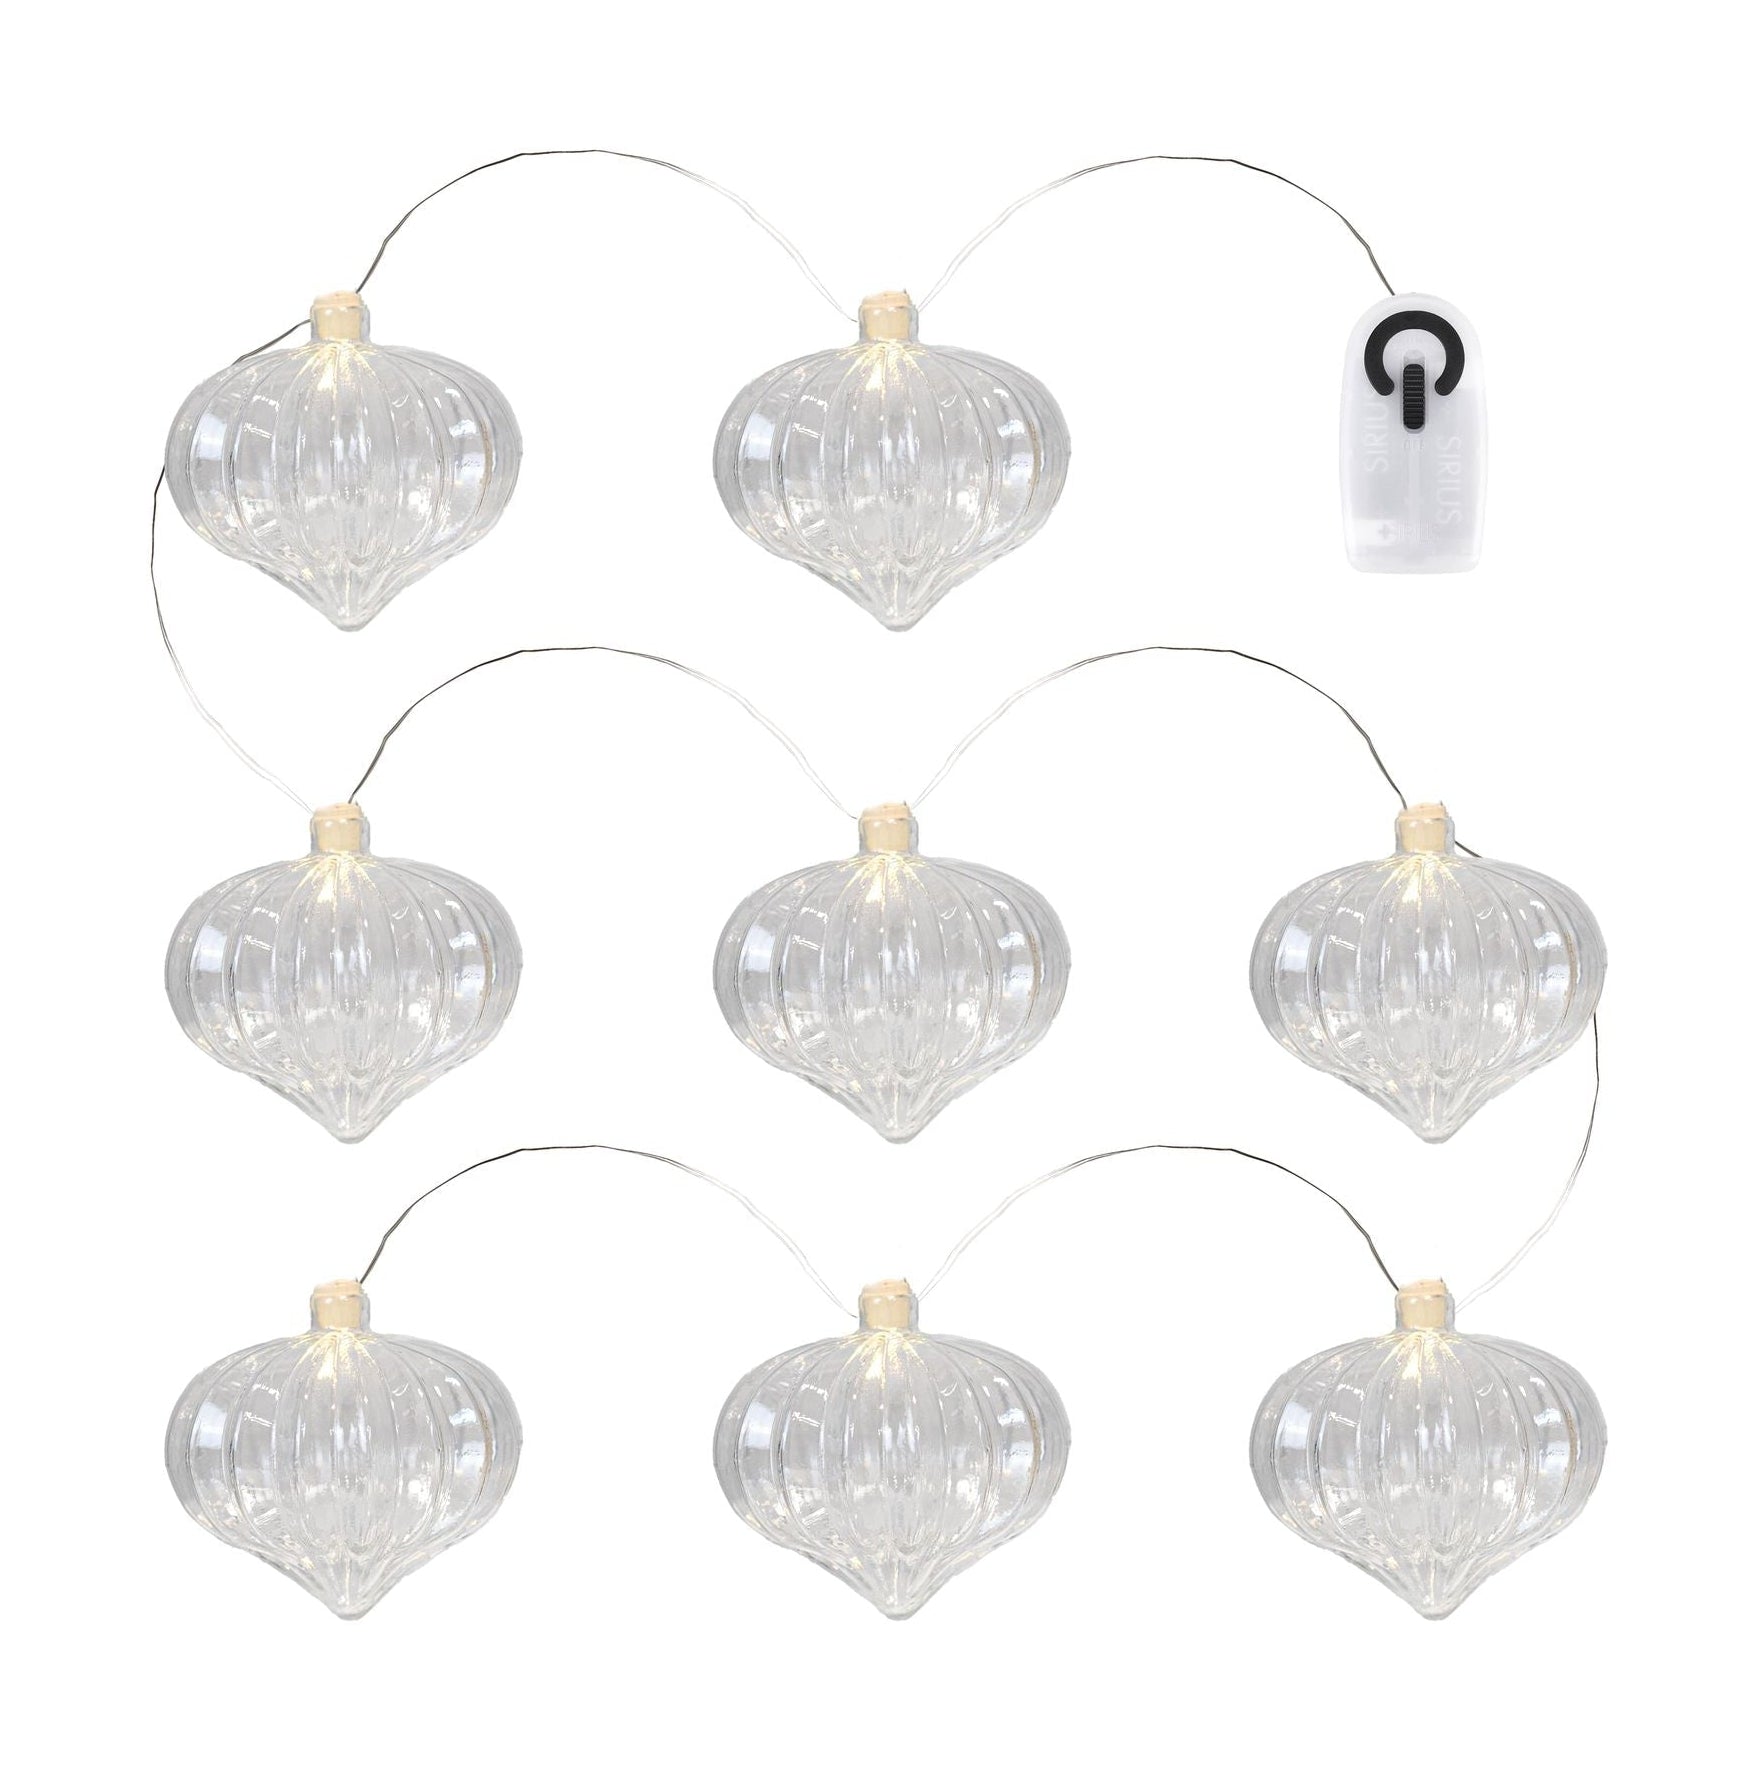 Sirius Millie Garland 8 Le Ds, Clear